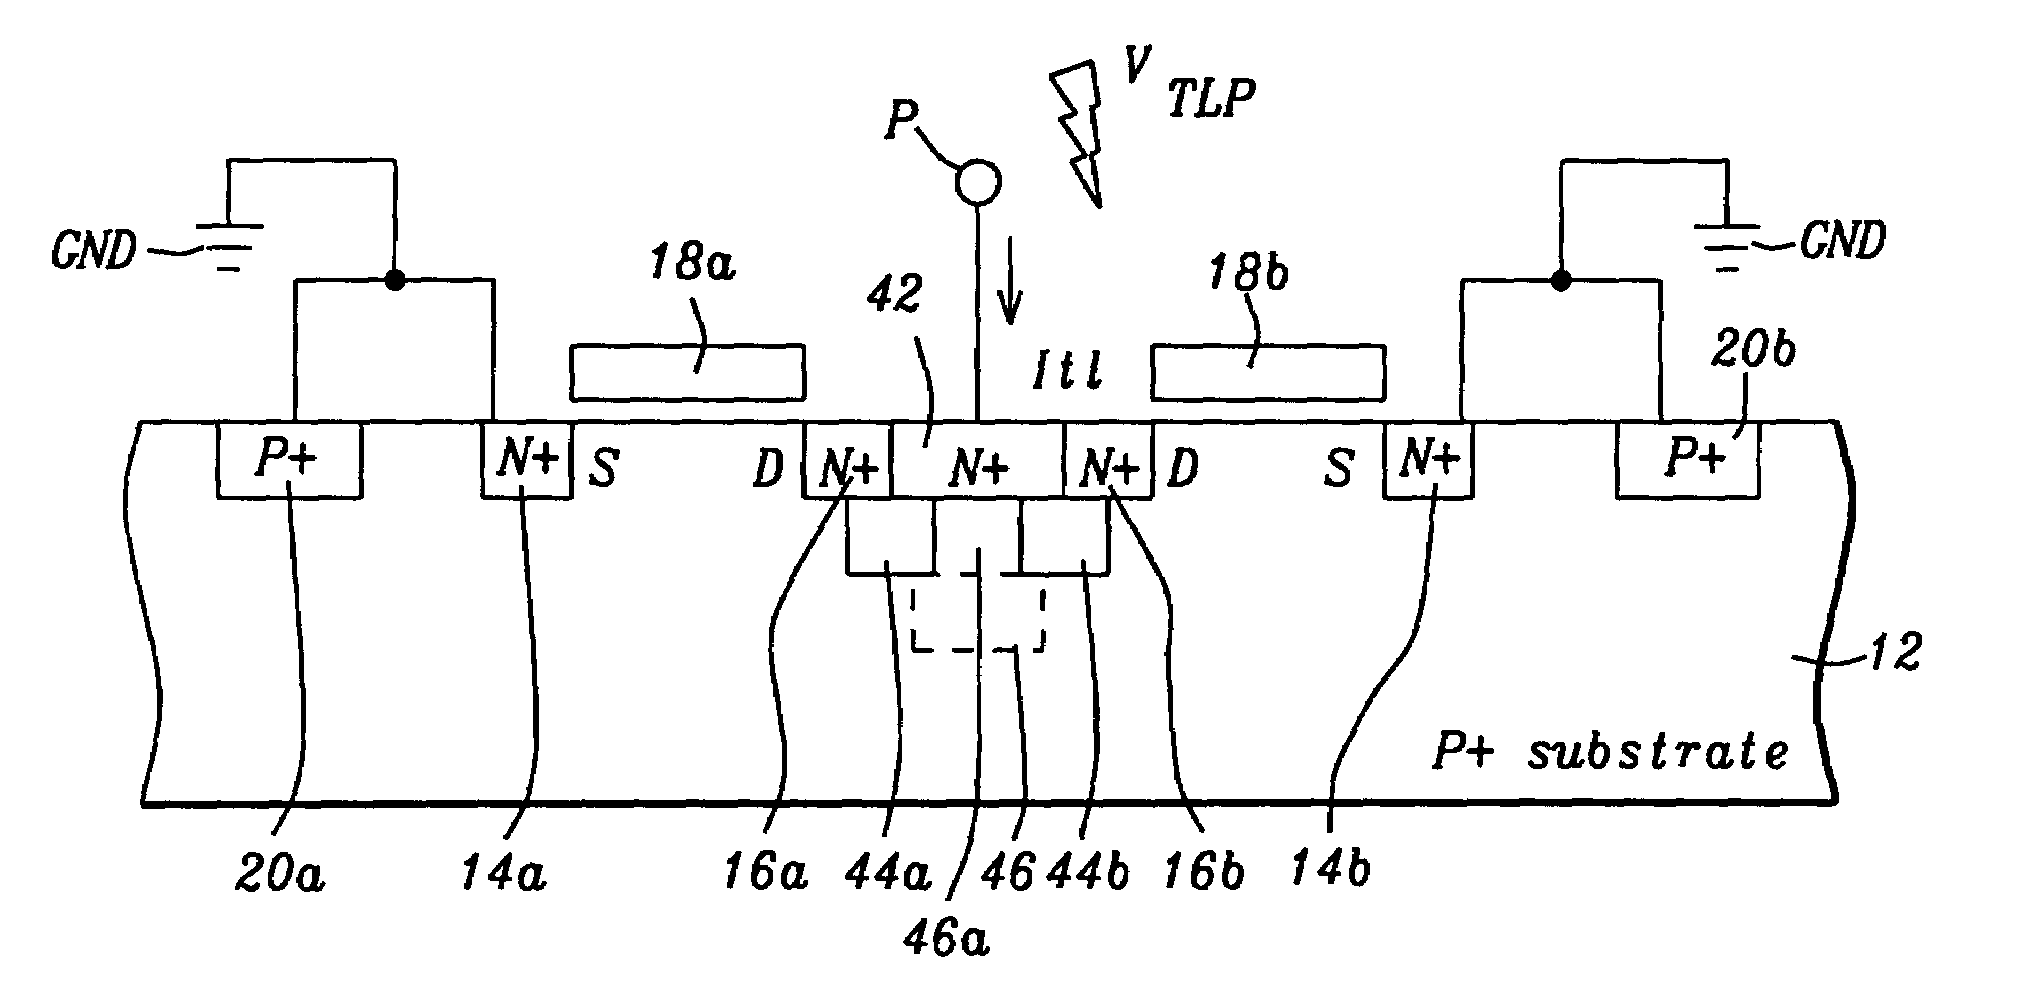 Electrostatic discharge protection device with complementary dual drain implant